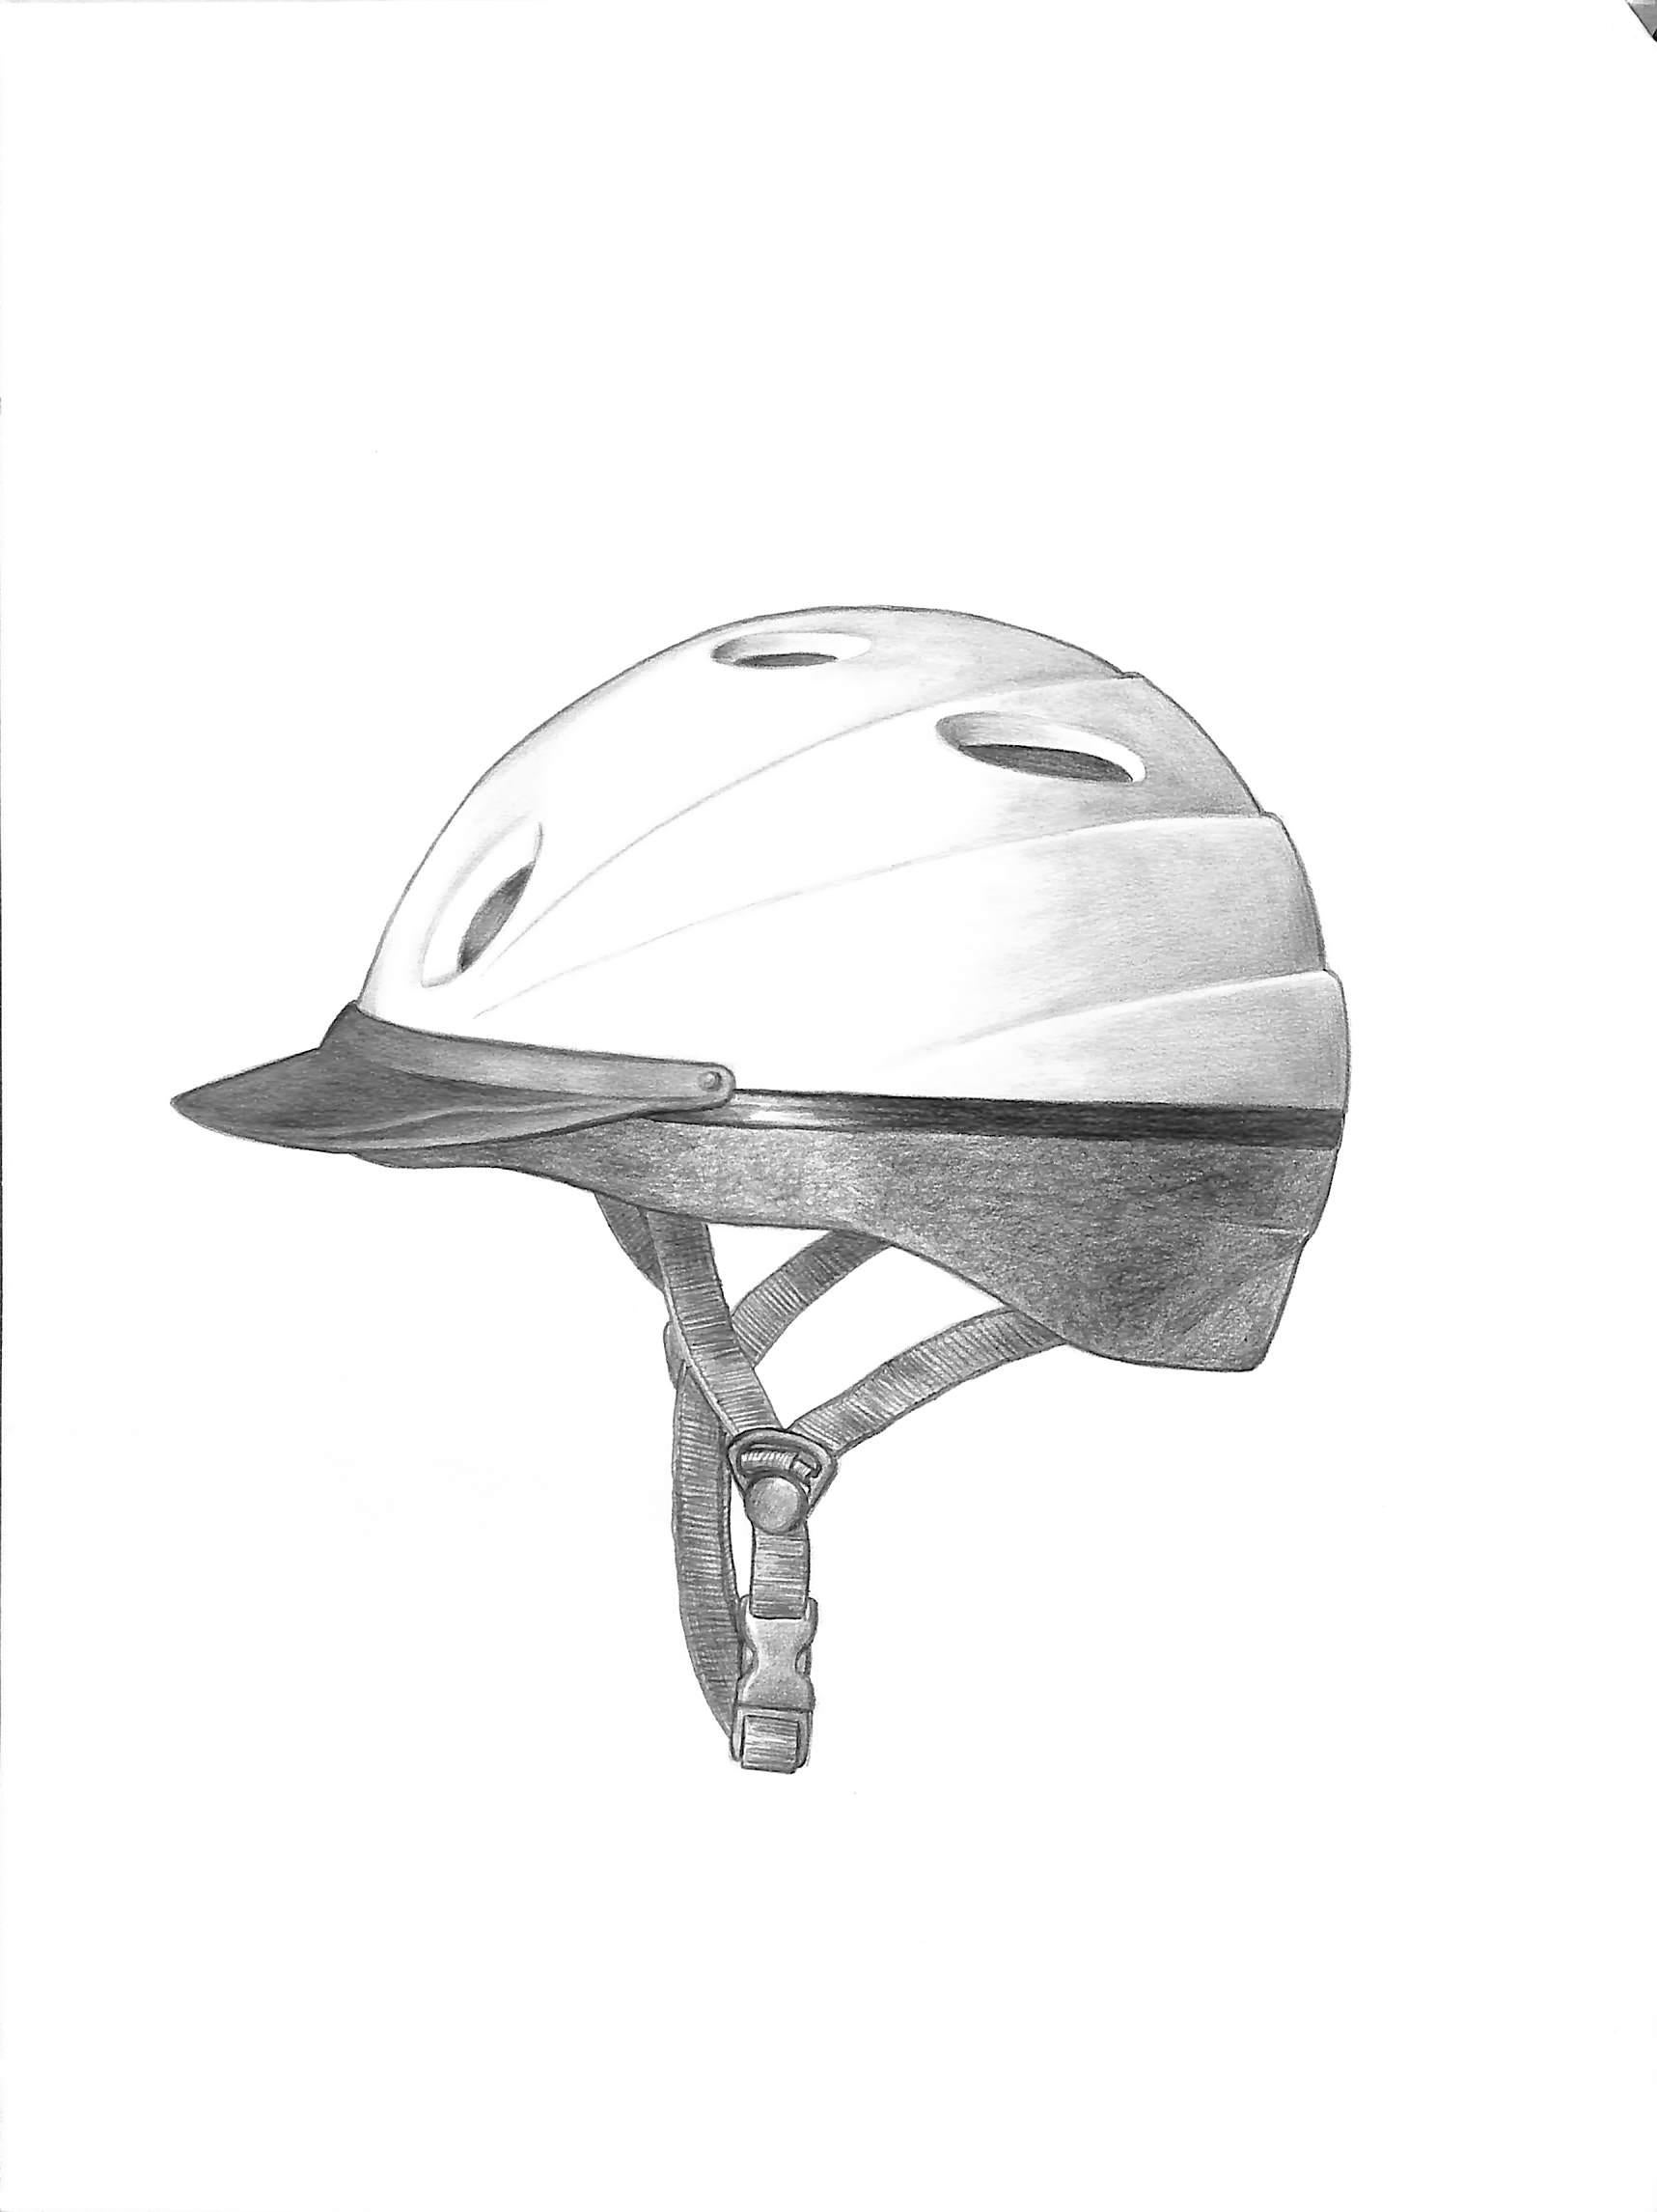 Del Mar Classico Helmet Graphite Drawing - Art by Unknown